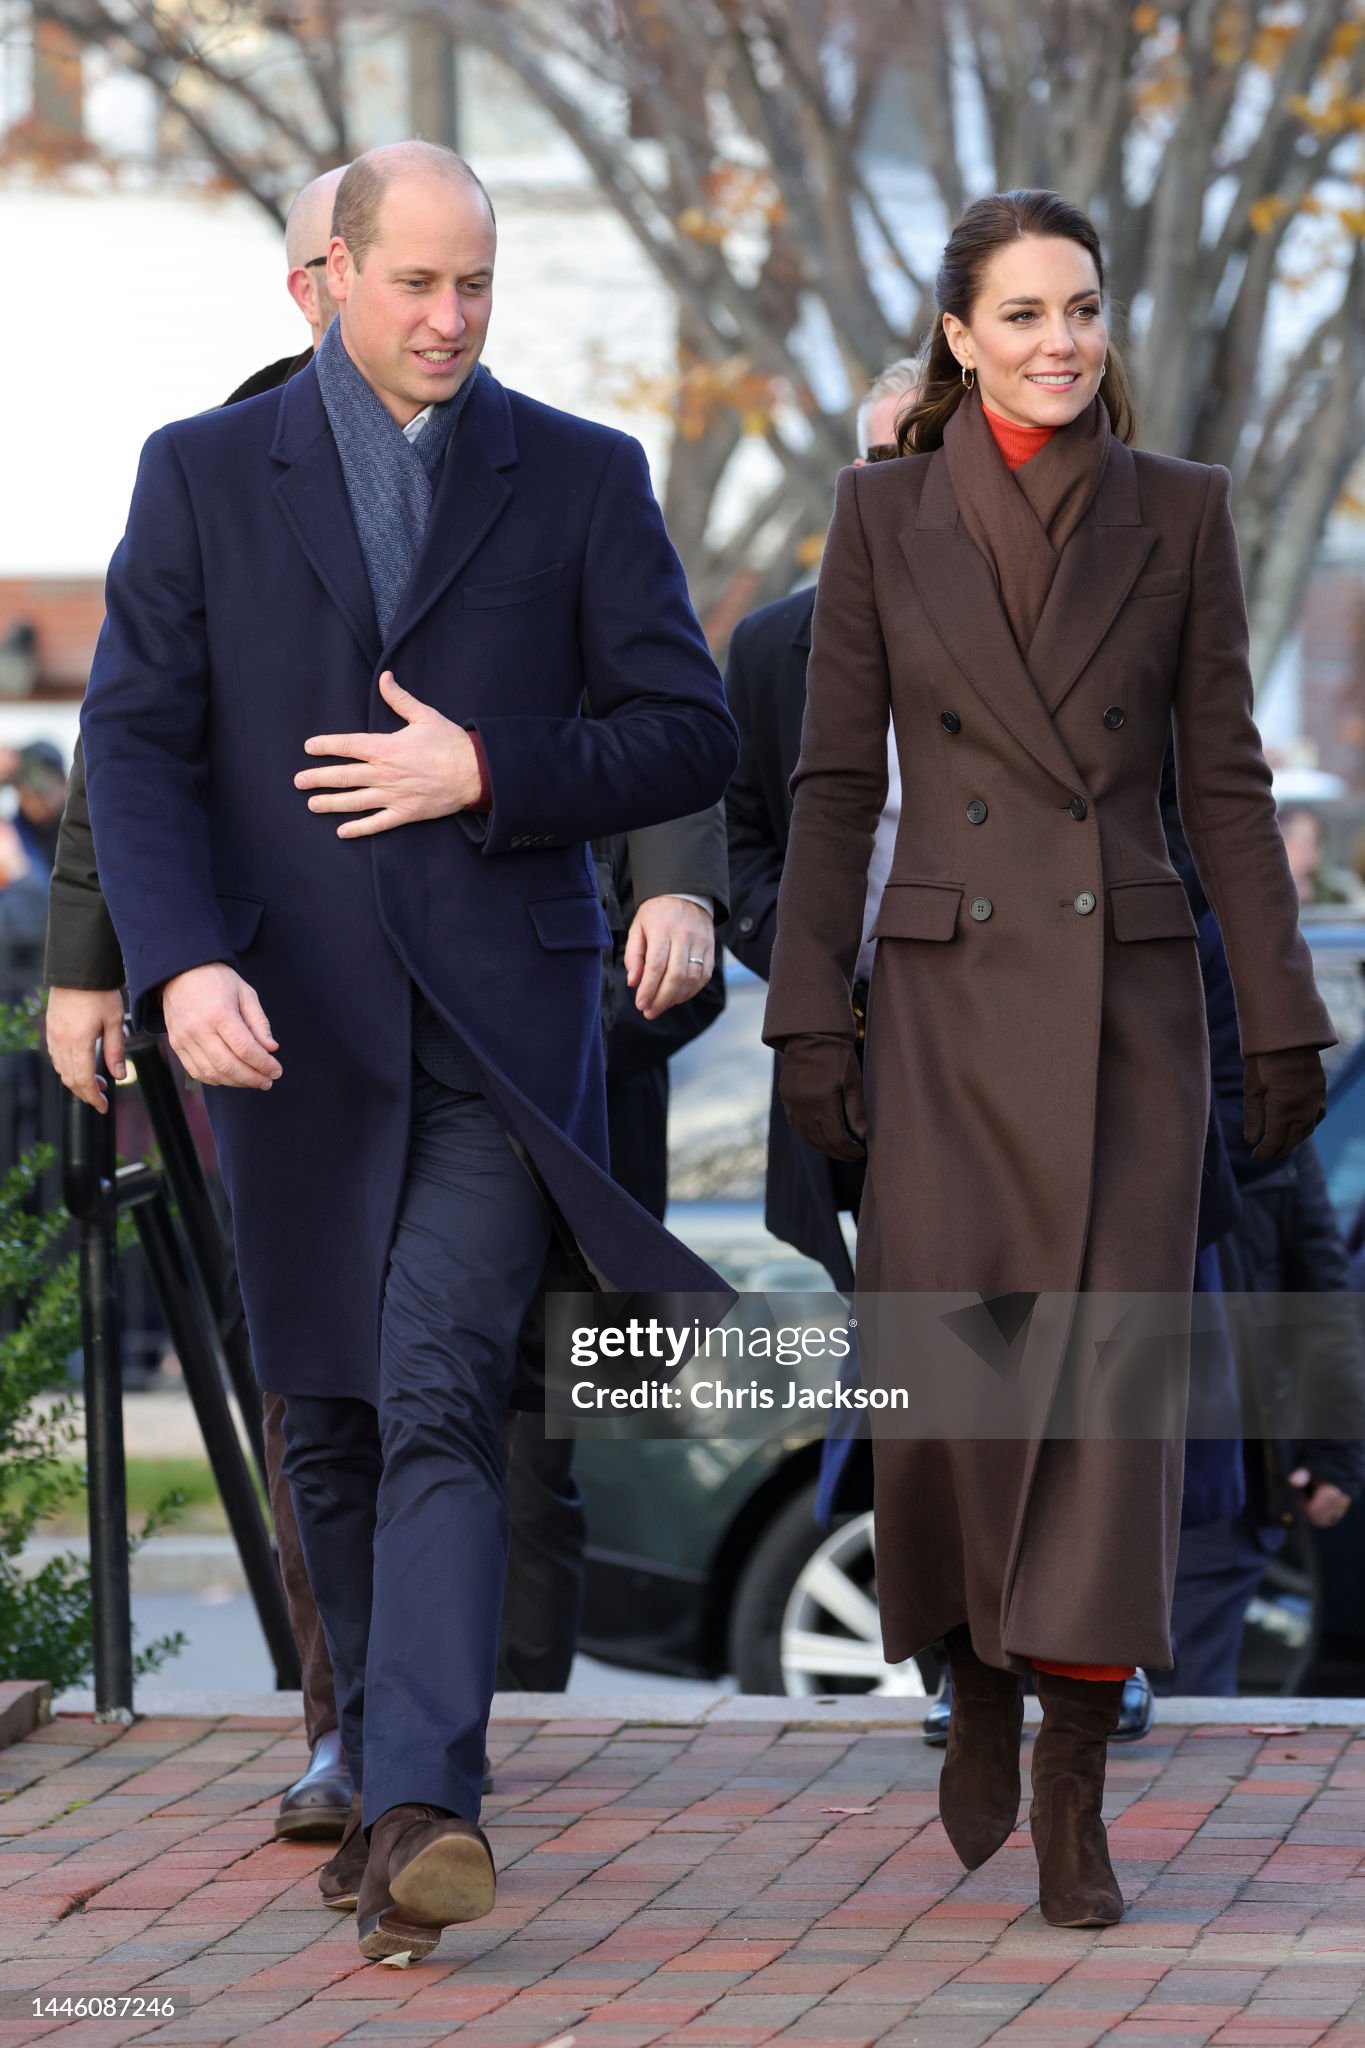 the-prince-and-princess-of-wales-visit-boston-day-2.jpg?s=2048x2048&w=gi&k=20&c=UVwqQd1Md6OZCt4o8toNSoh1dCIzz8PKgtHjf6FpTcI=